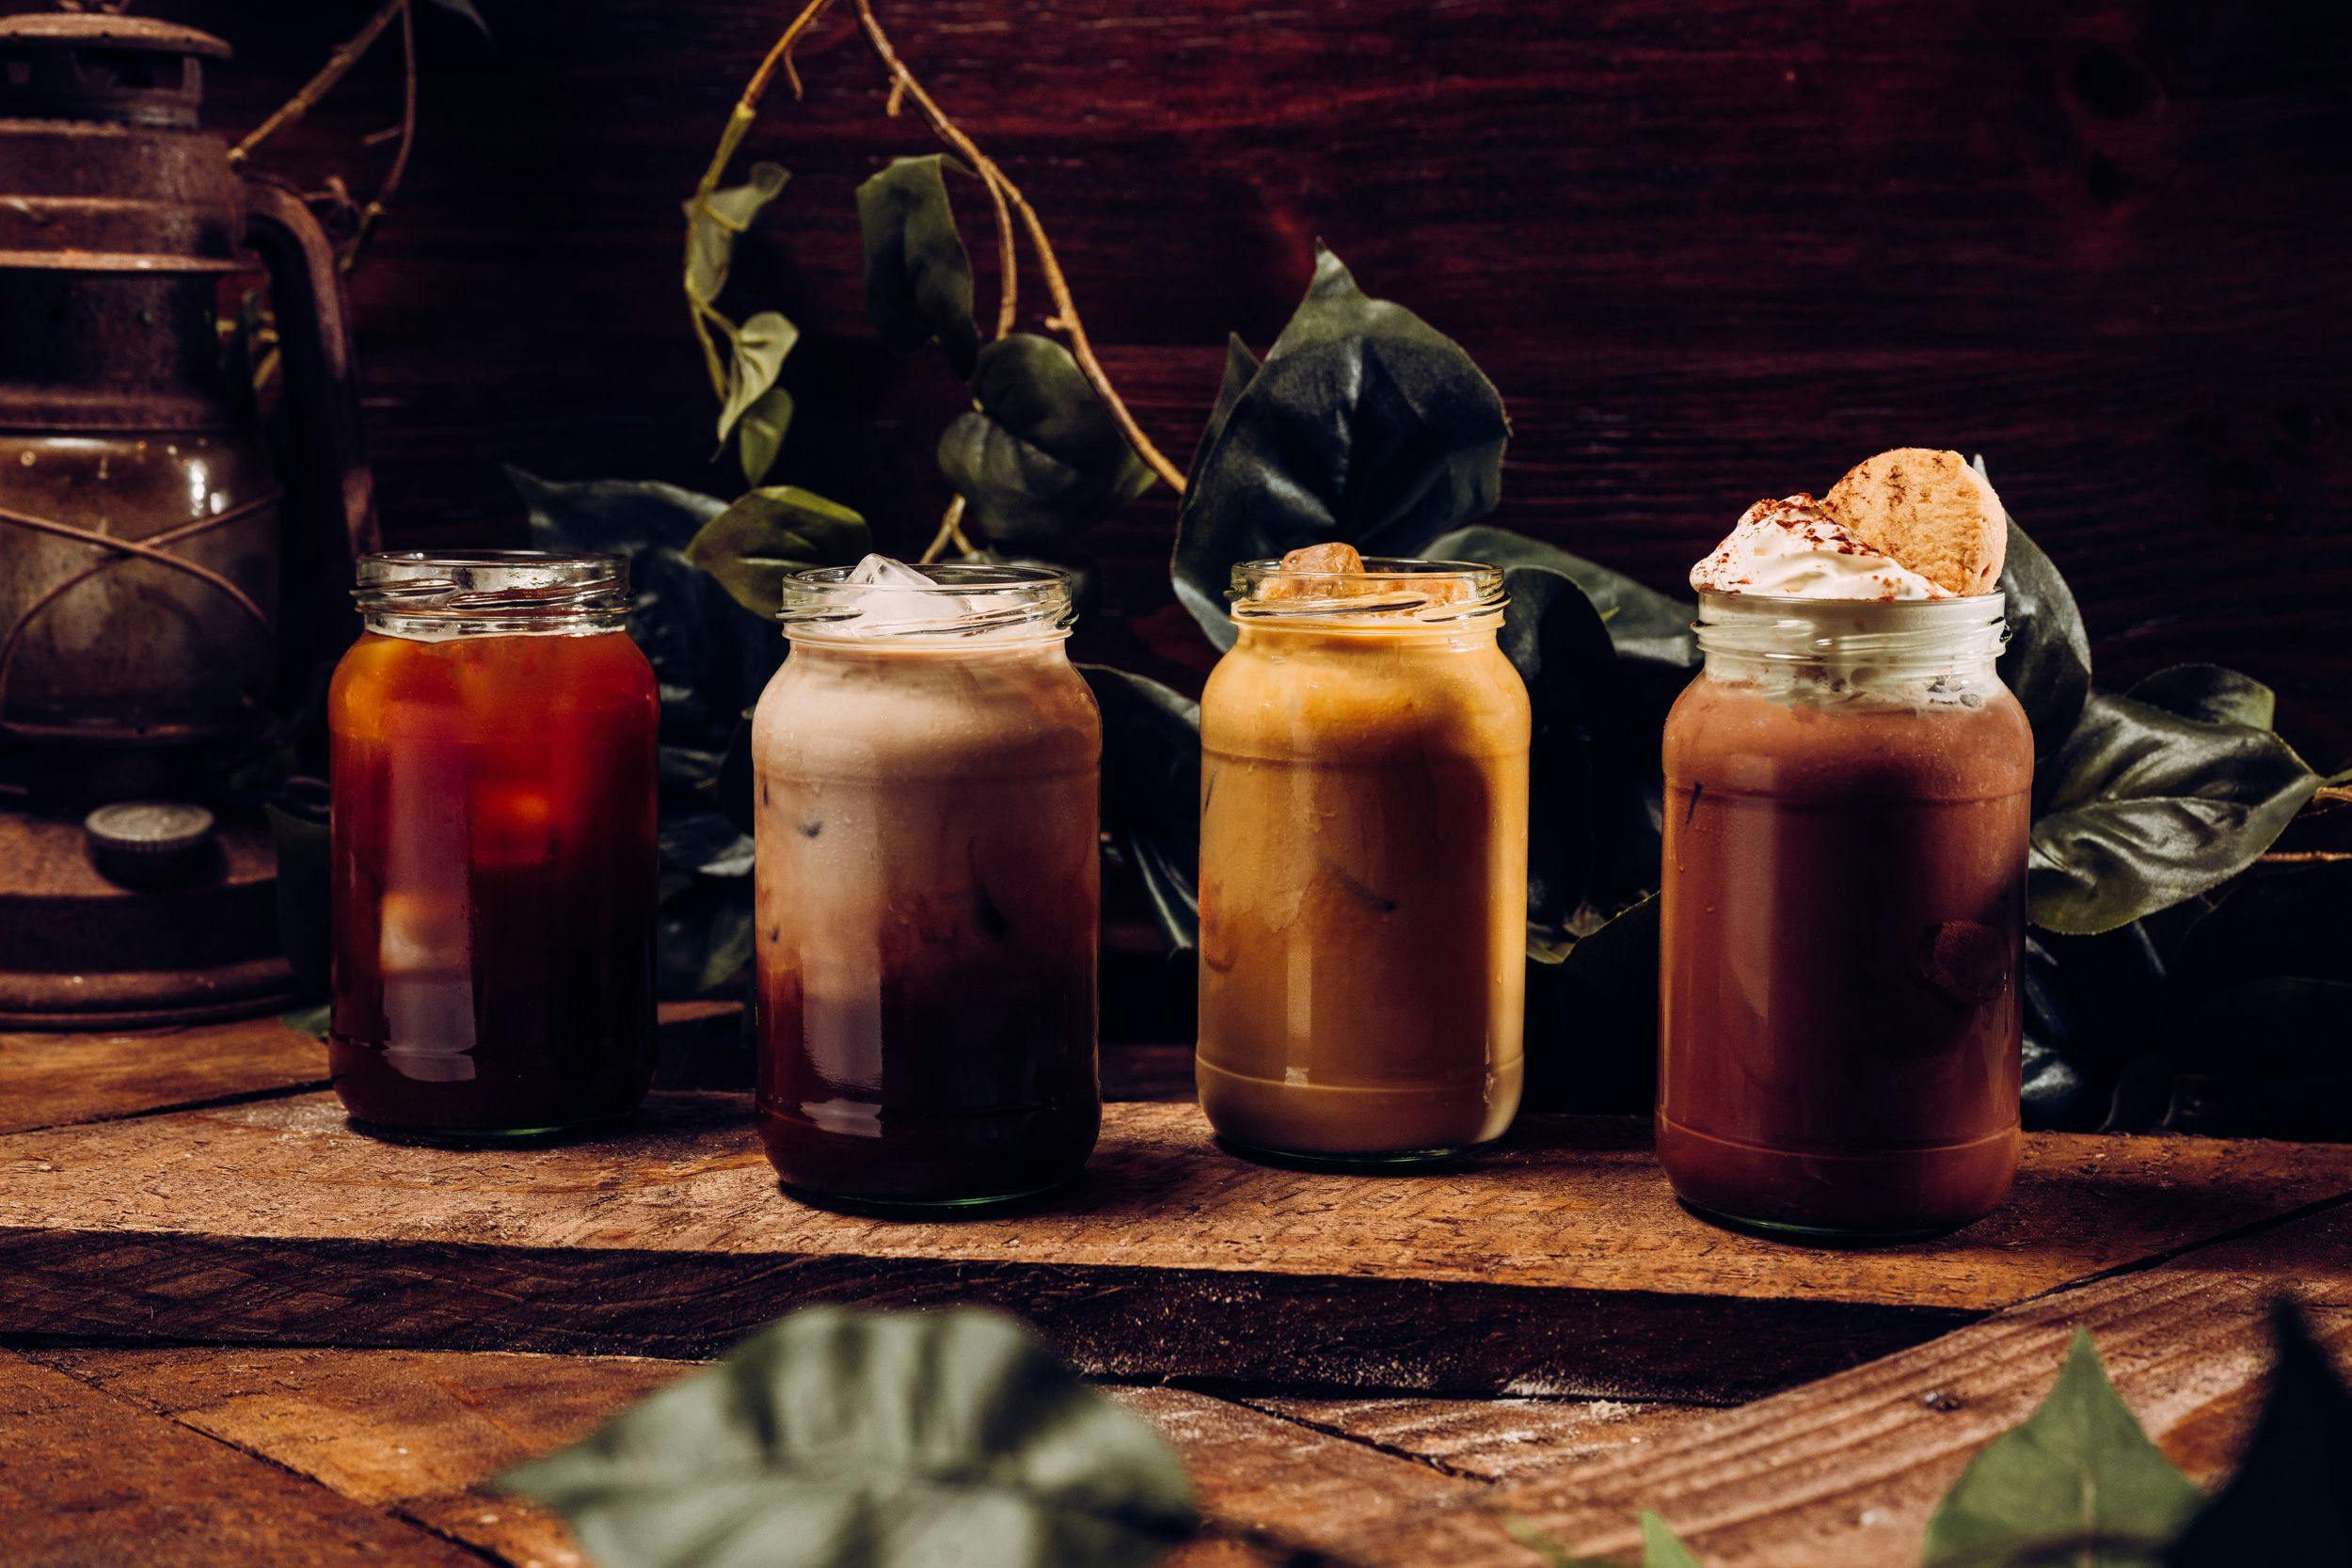 A close up image of four iced drinks in a row.